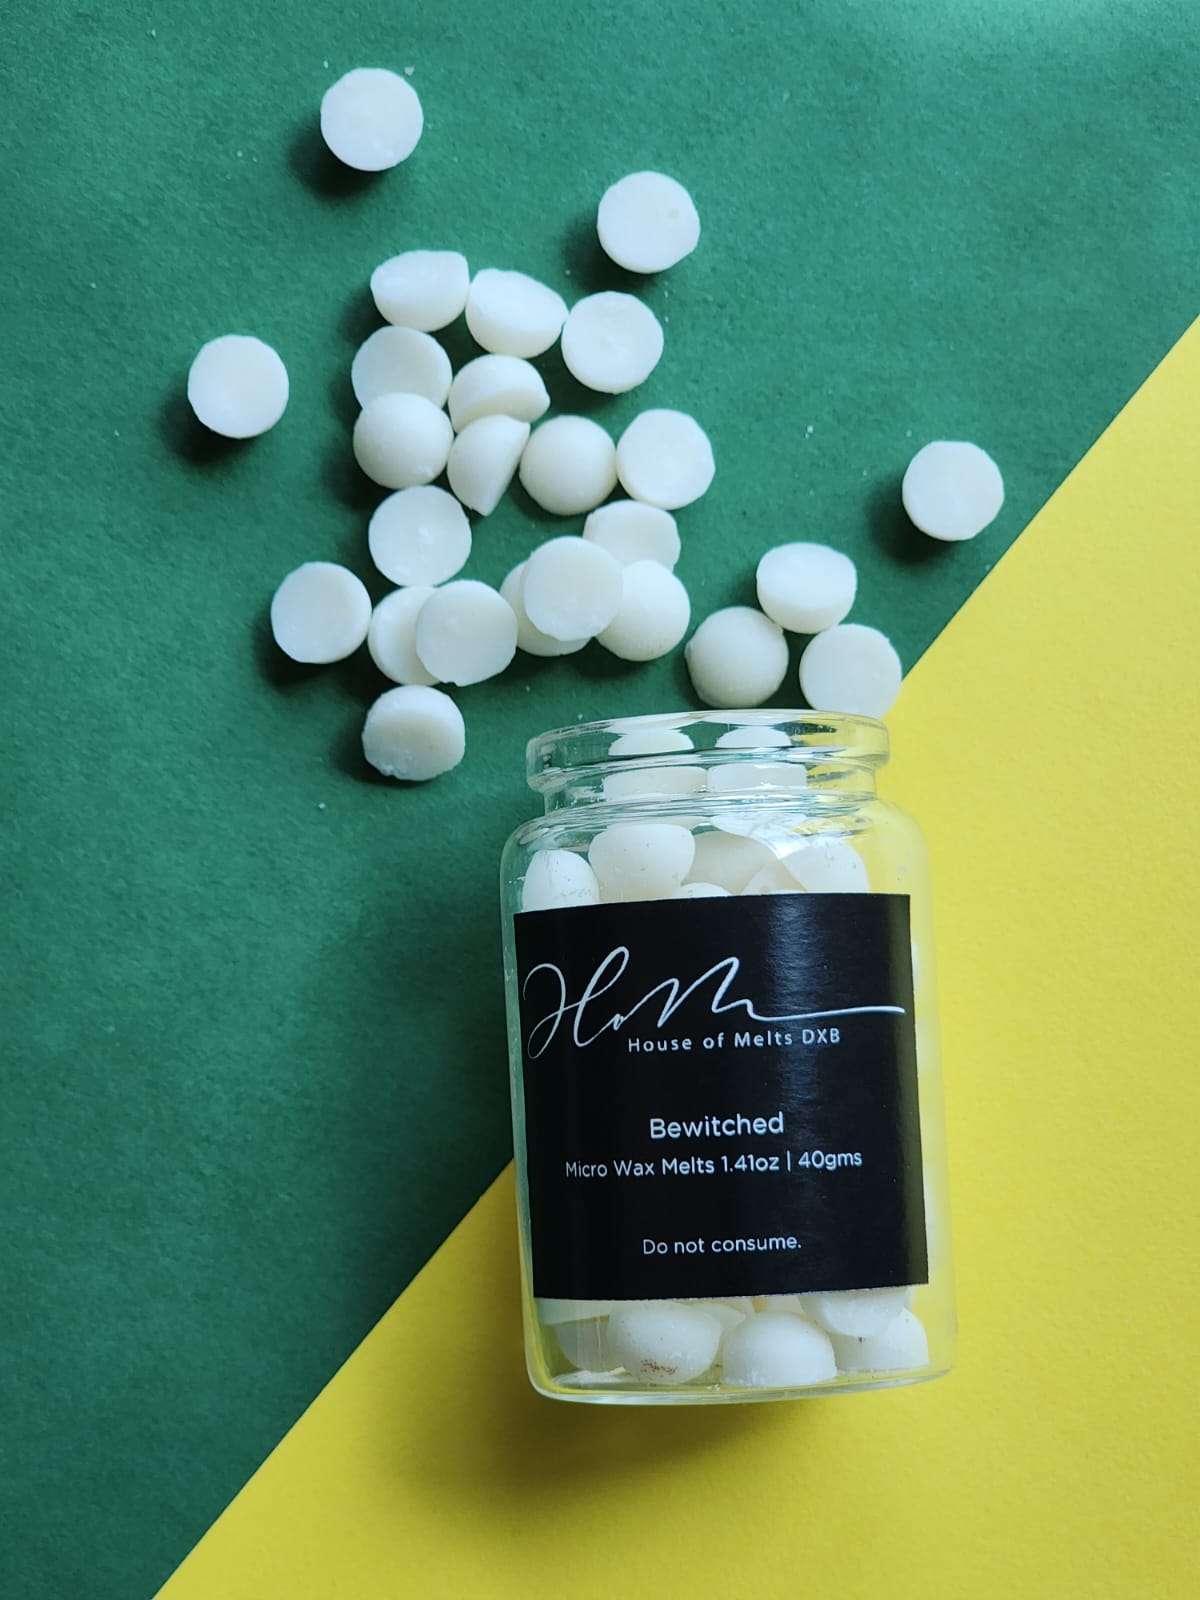 Bewitched micro wax melts